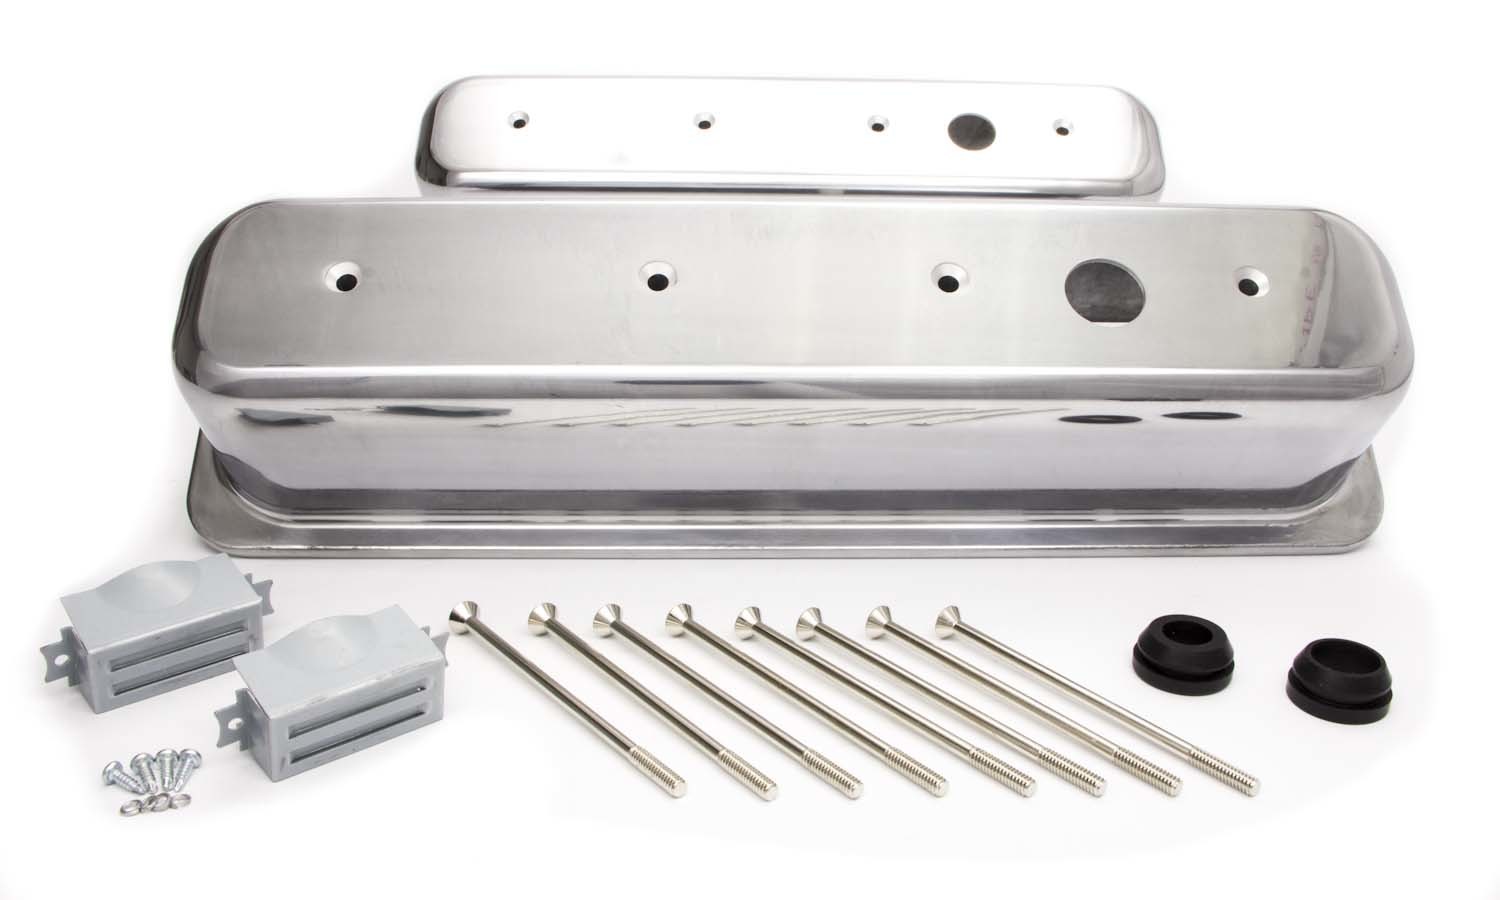 Racing Power Company R6146-1 Tall Plain Polished Aluminum Center Bolt Valve Cover for Small Block Chevy